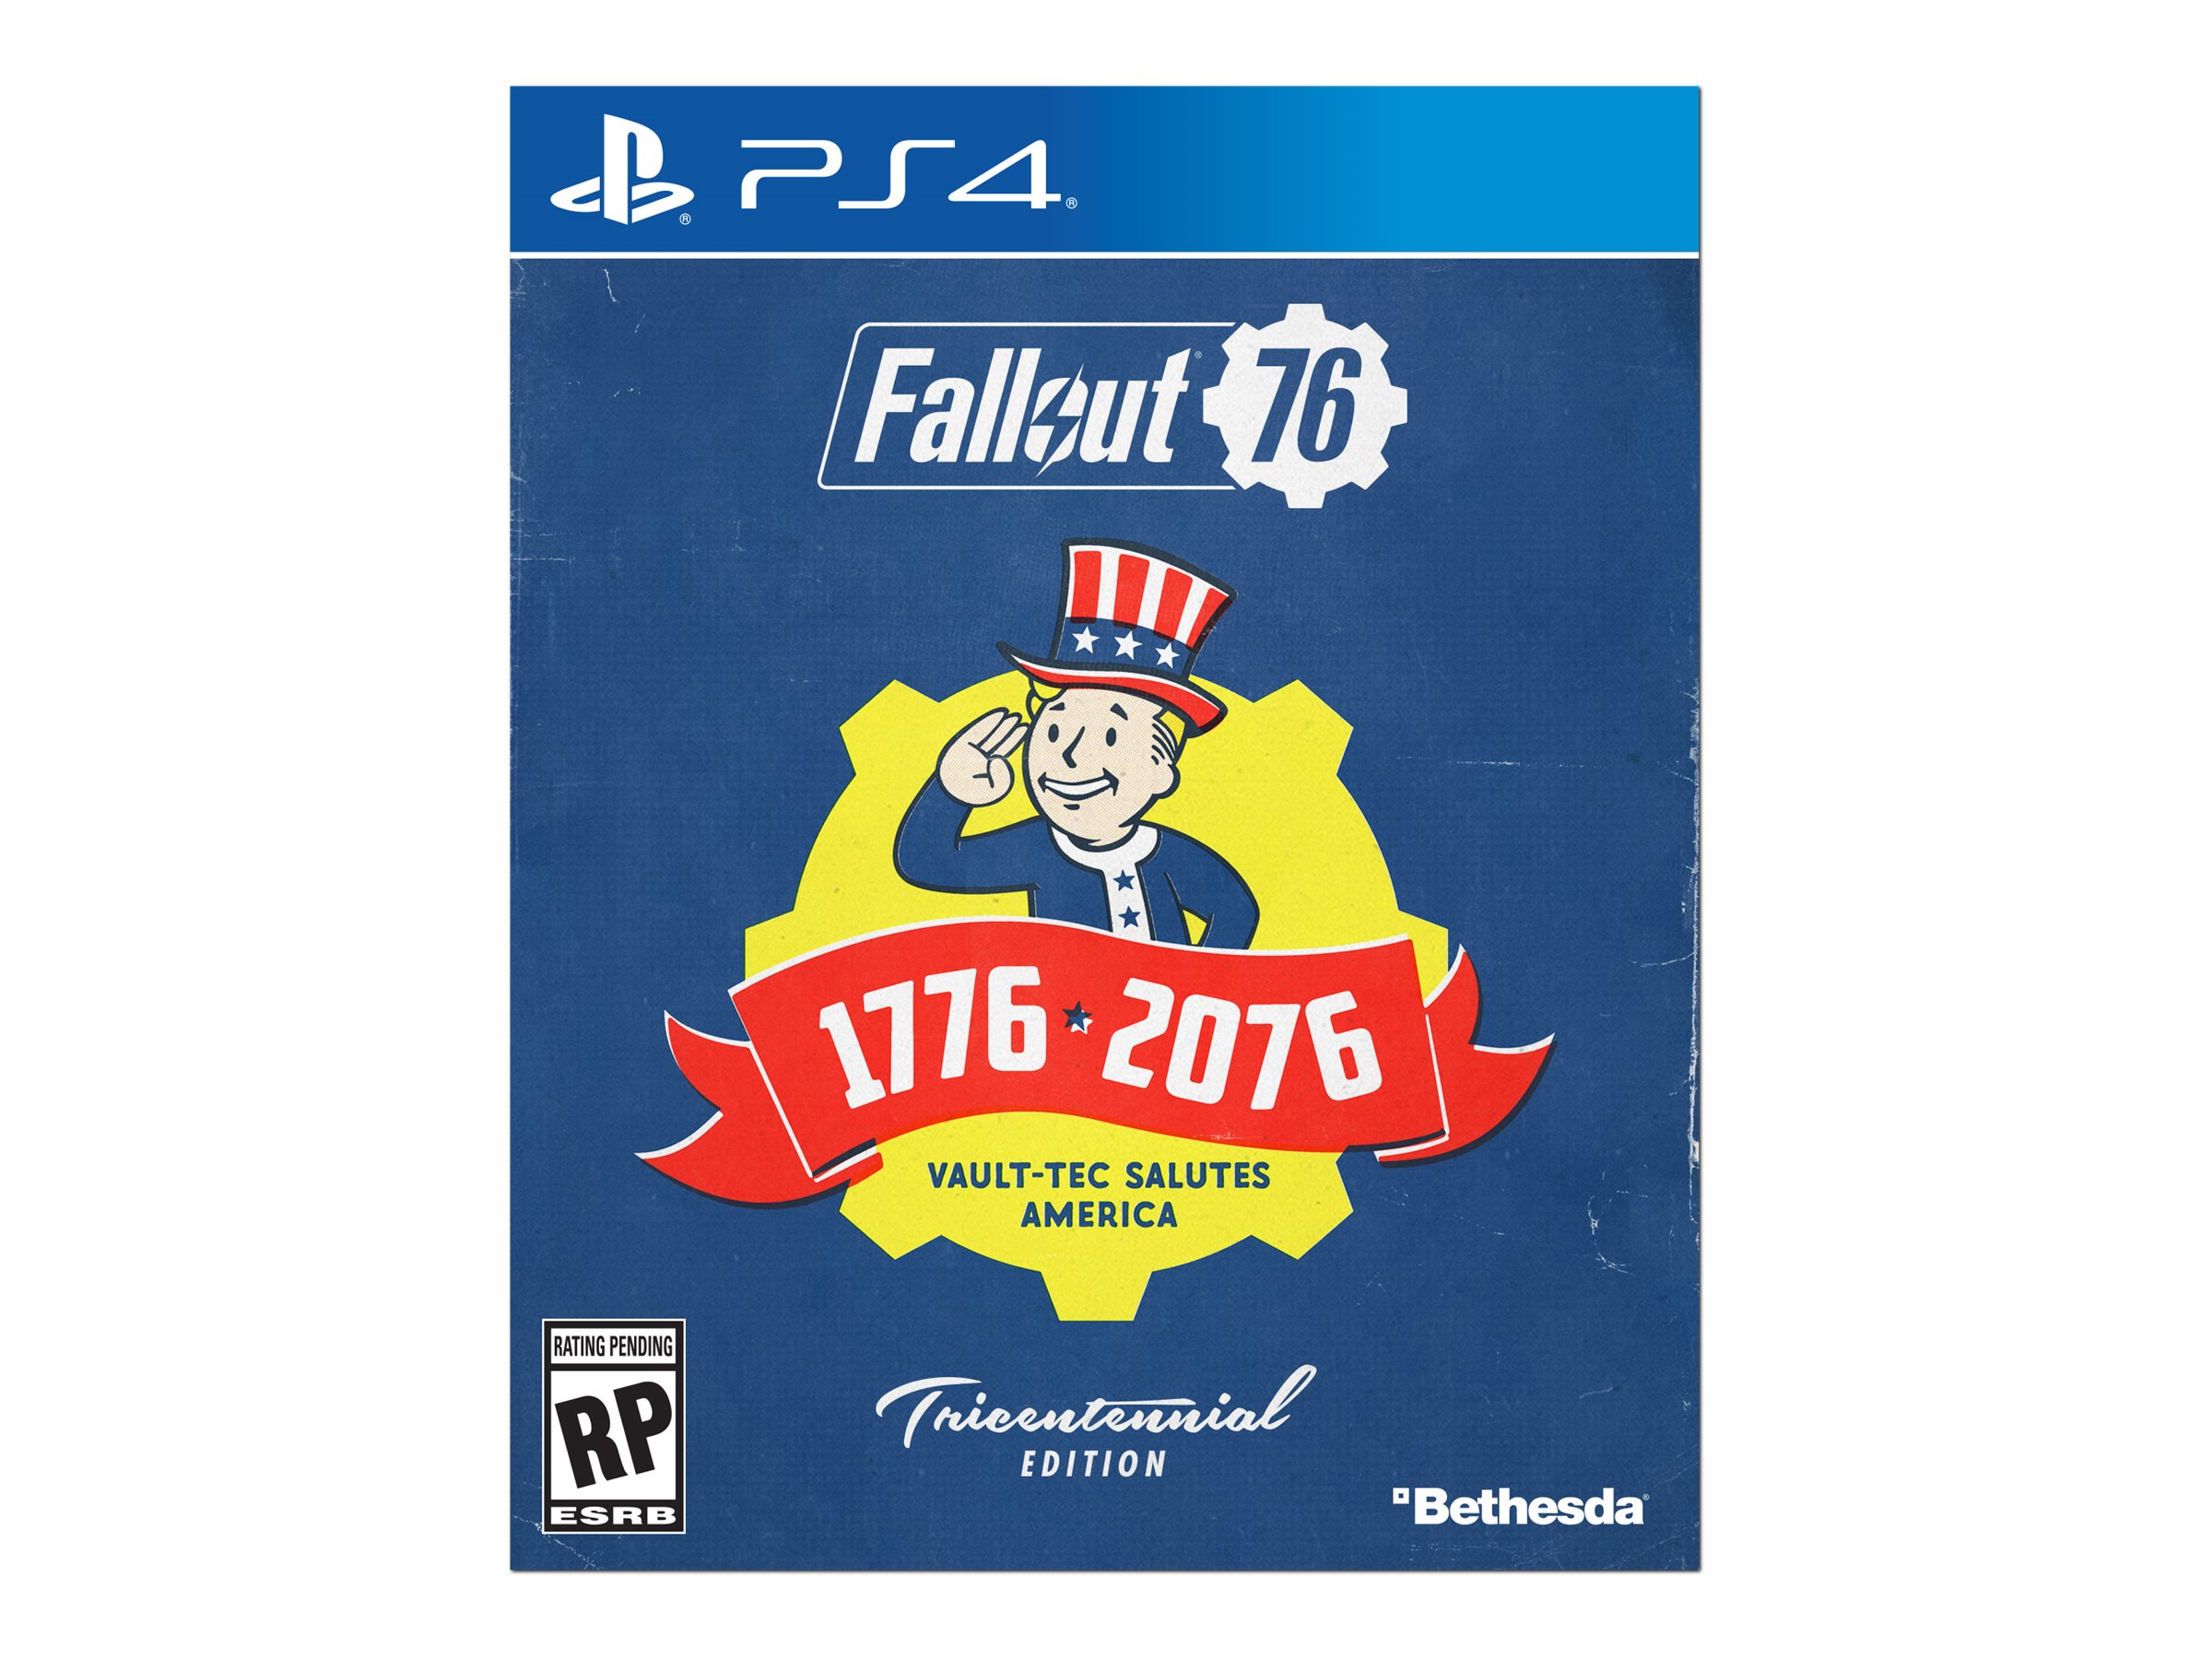 Fallout 76 Tricentennial Edition, Bethesda Softworks, PlayStation 4, 093155173118 - image 1 of 5